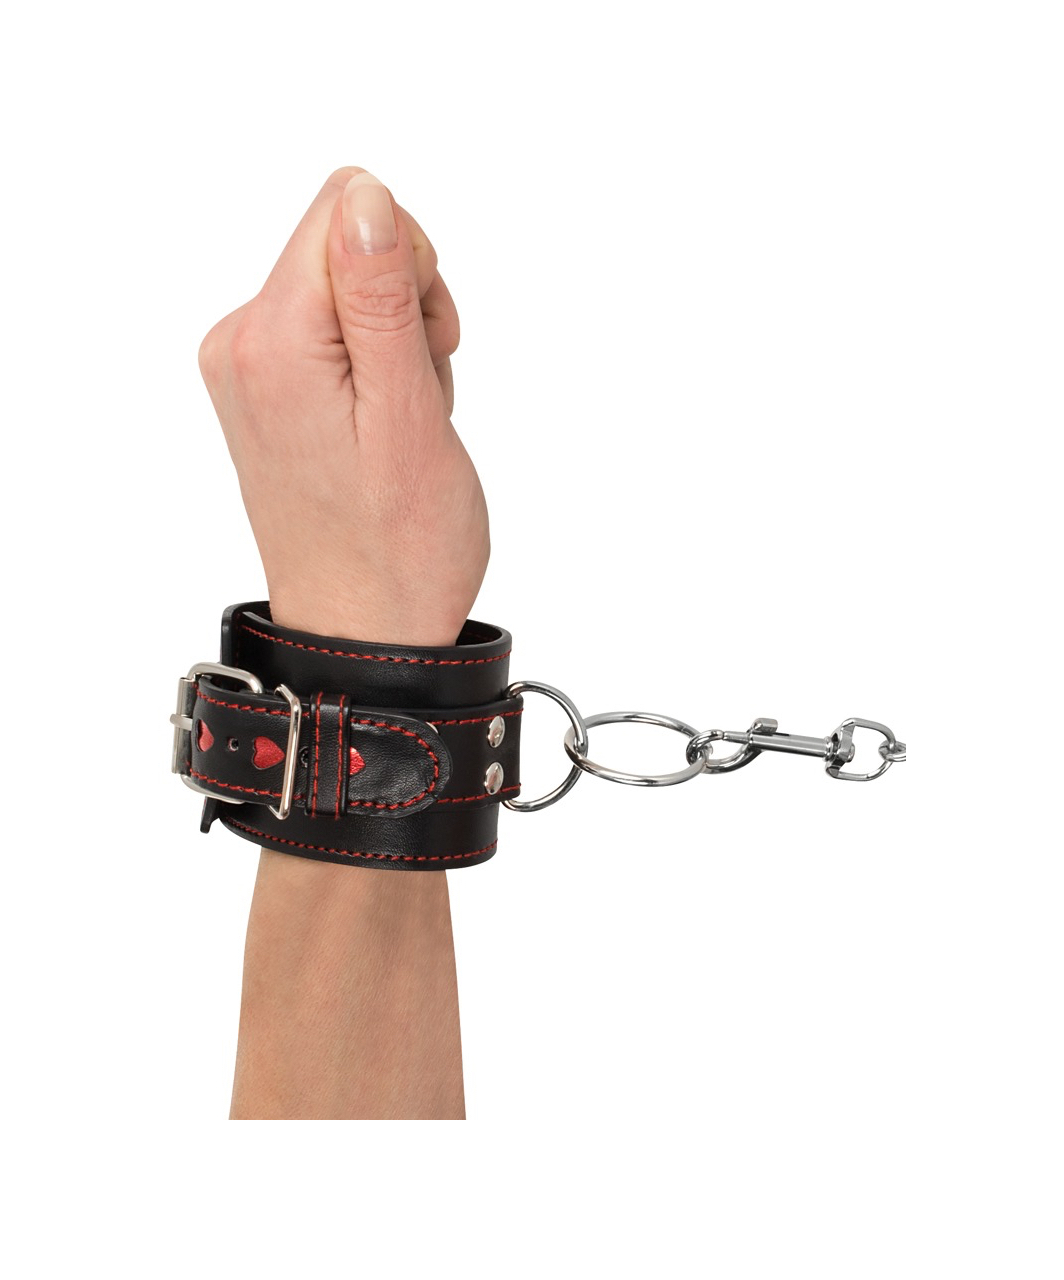 Bad Kitty leather-look hand cuffs